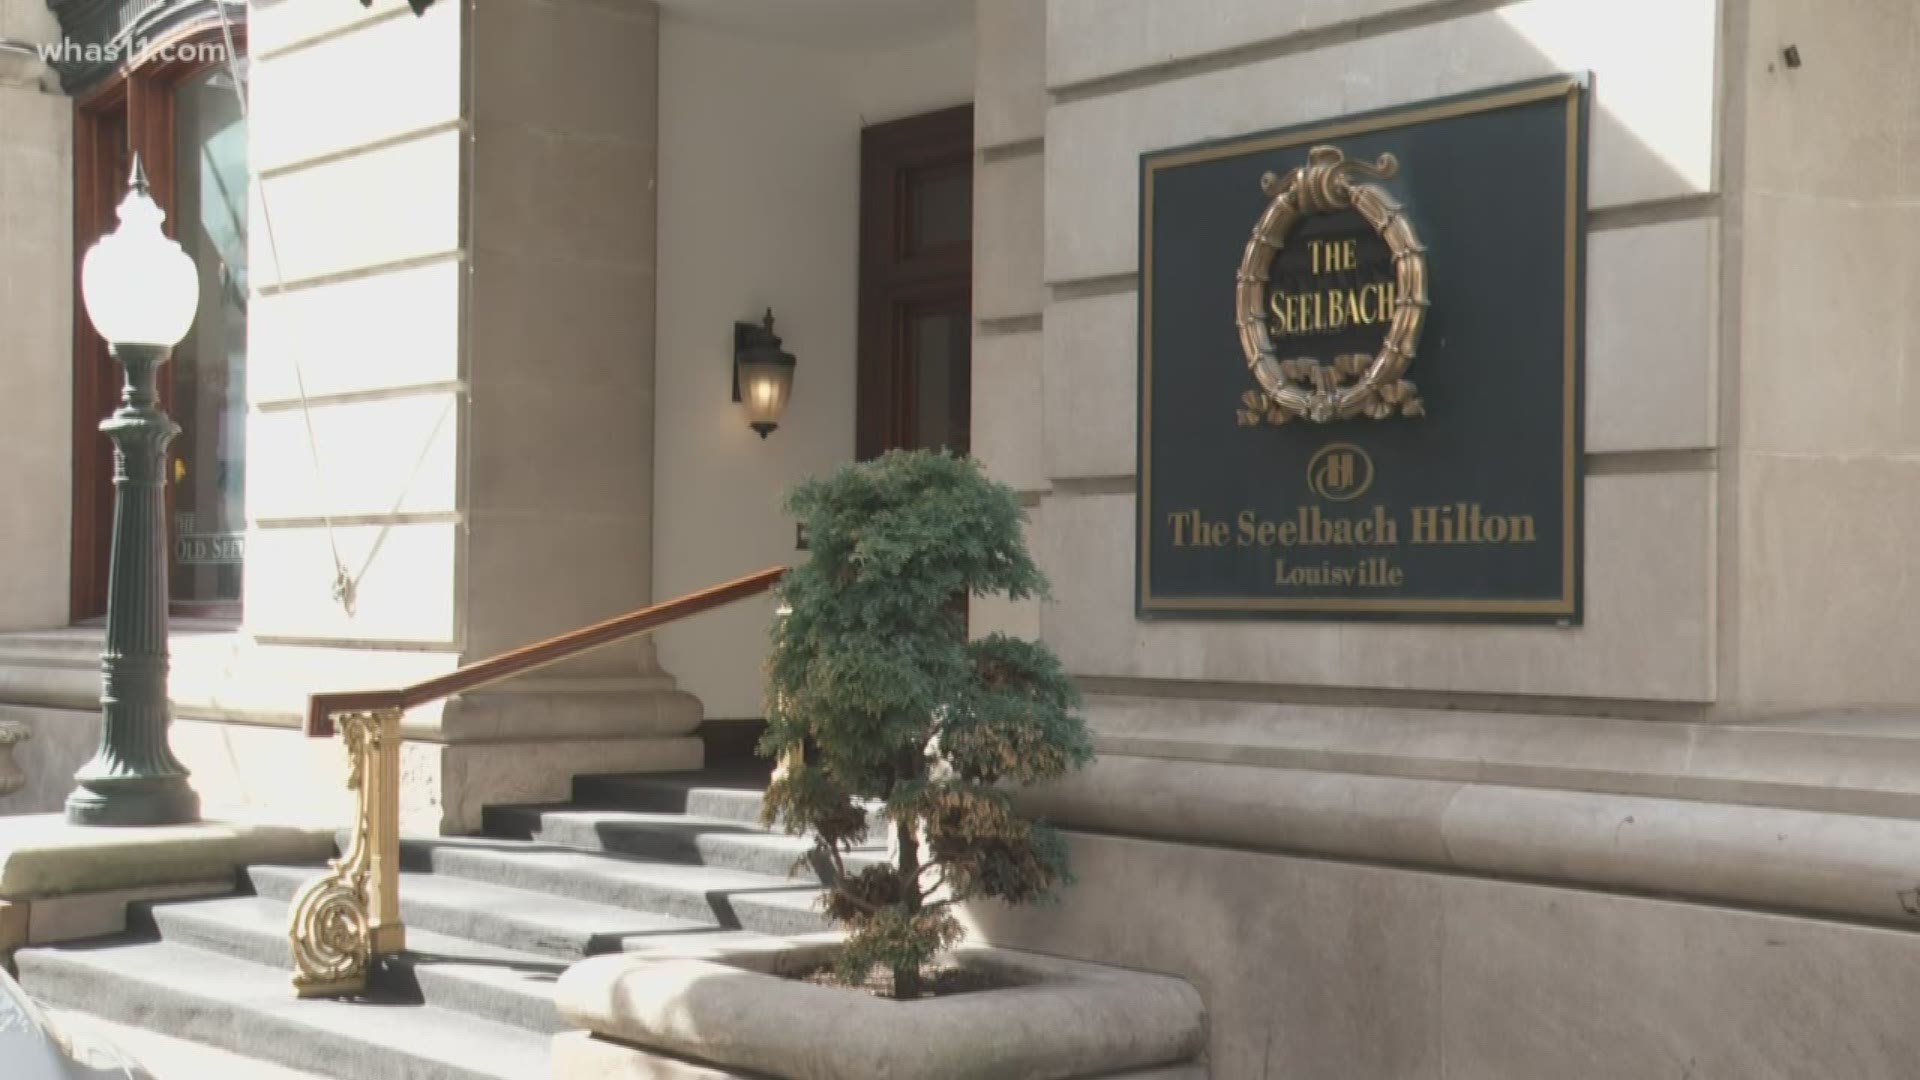 The addition planned for the Seelbach would go above the ballroom annex.